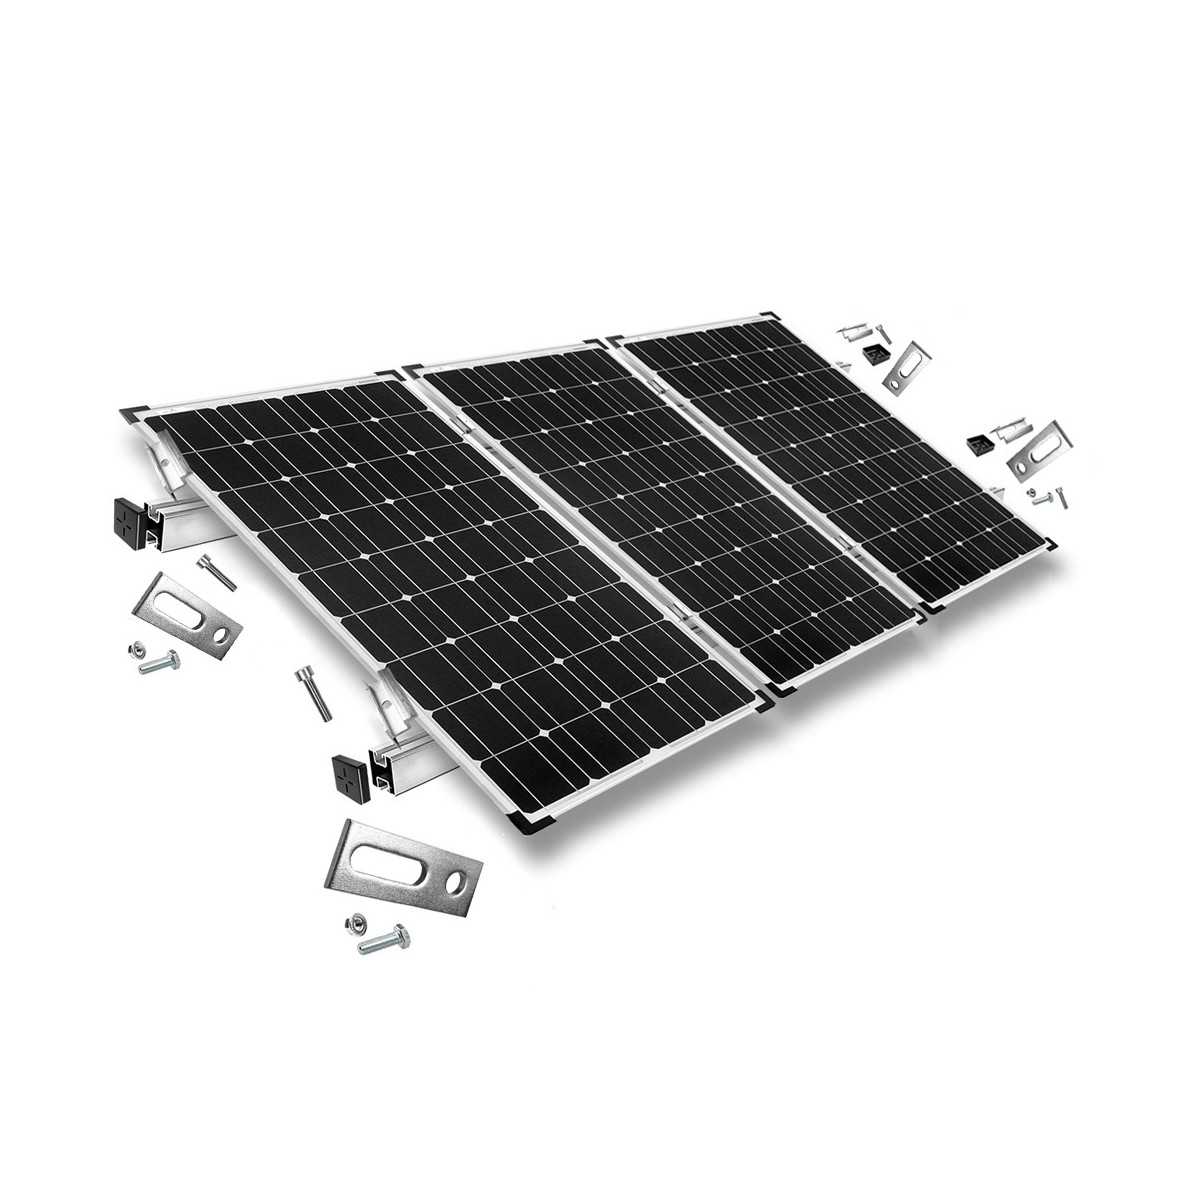 Mounting kit h30 with roof studs for pitched roof 3 frame 30 mm solar panels